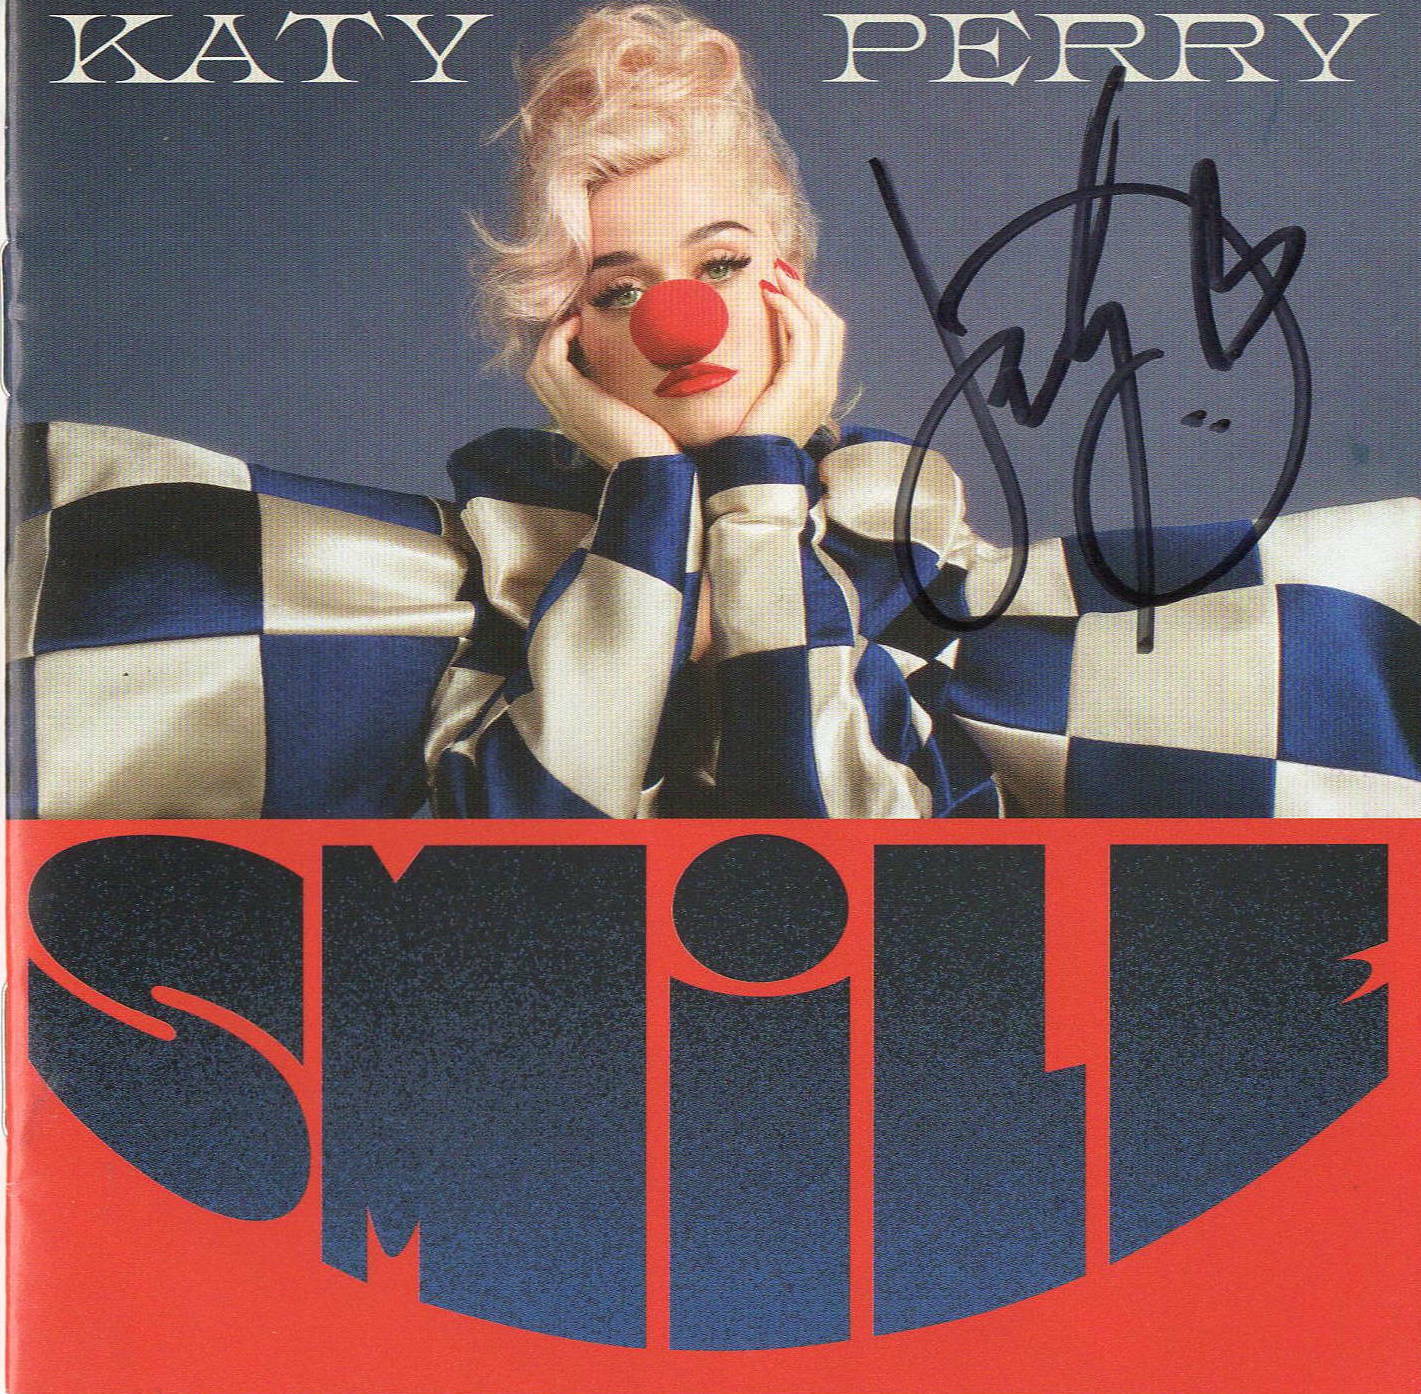 KATY PERRY SIGNED AUTOGRAPH SMILE ROCK CD BOOKLET BECKETT BAS 3